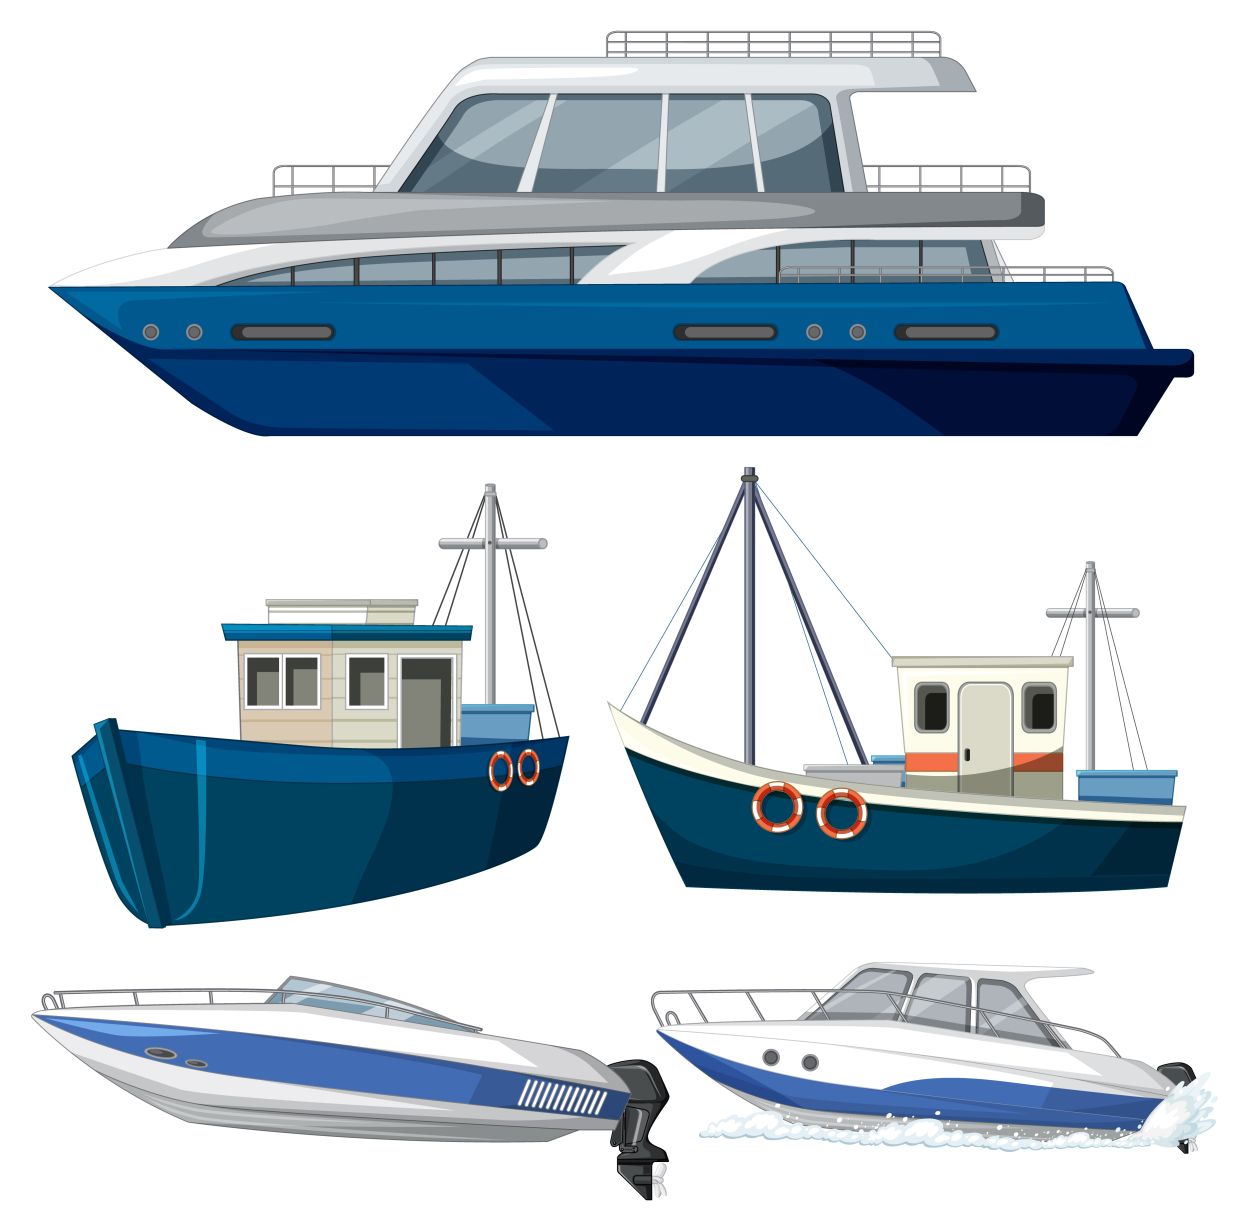 compatible boat types to monitoring using kommnet GPS tracking system